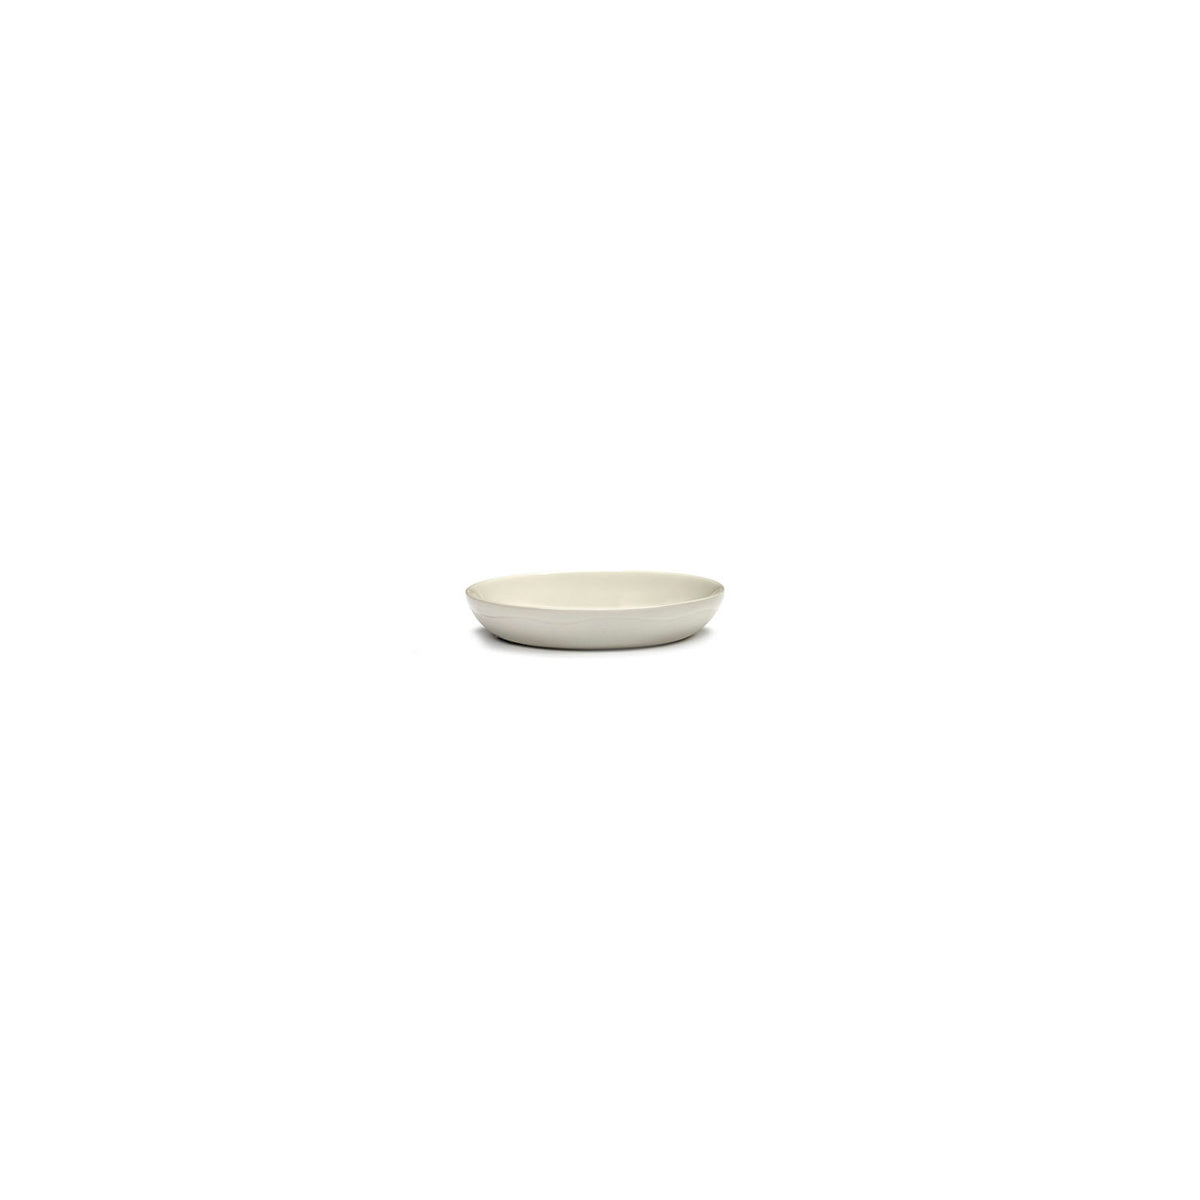 Ottolenghi for Serax Feast collection, side view of small dish, with White Swirl-Stripes Blue design.